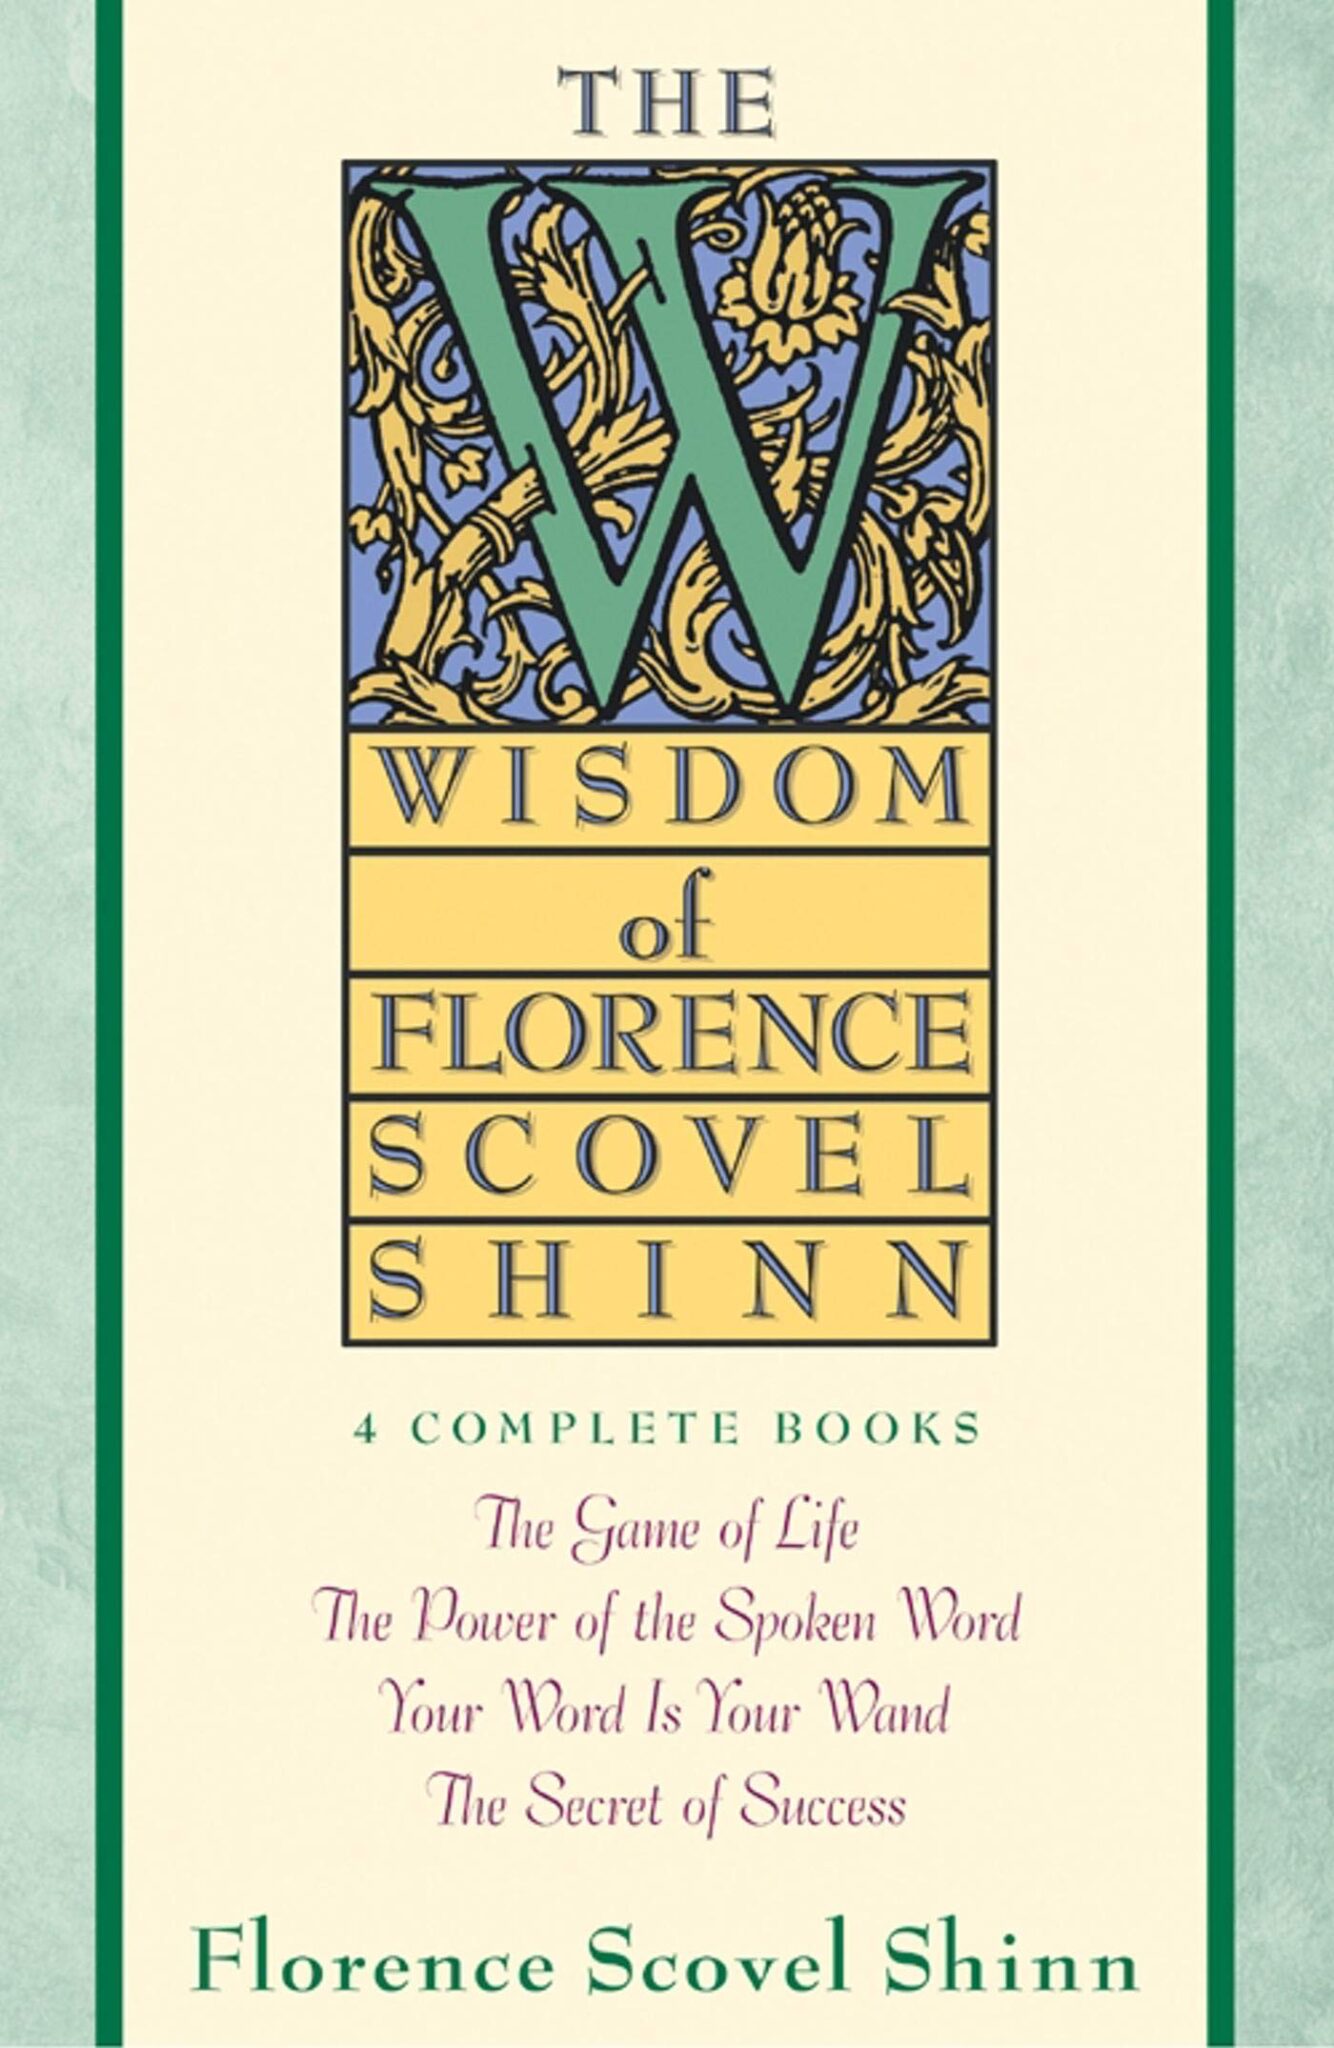 The Complete Works Of Florence Scovel Shinn Pdf Free Download